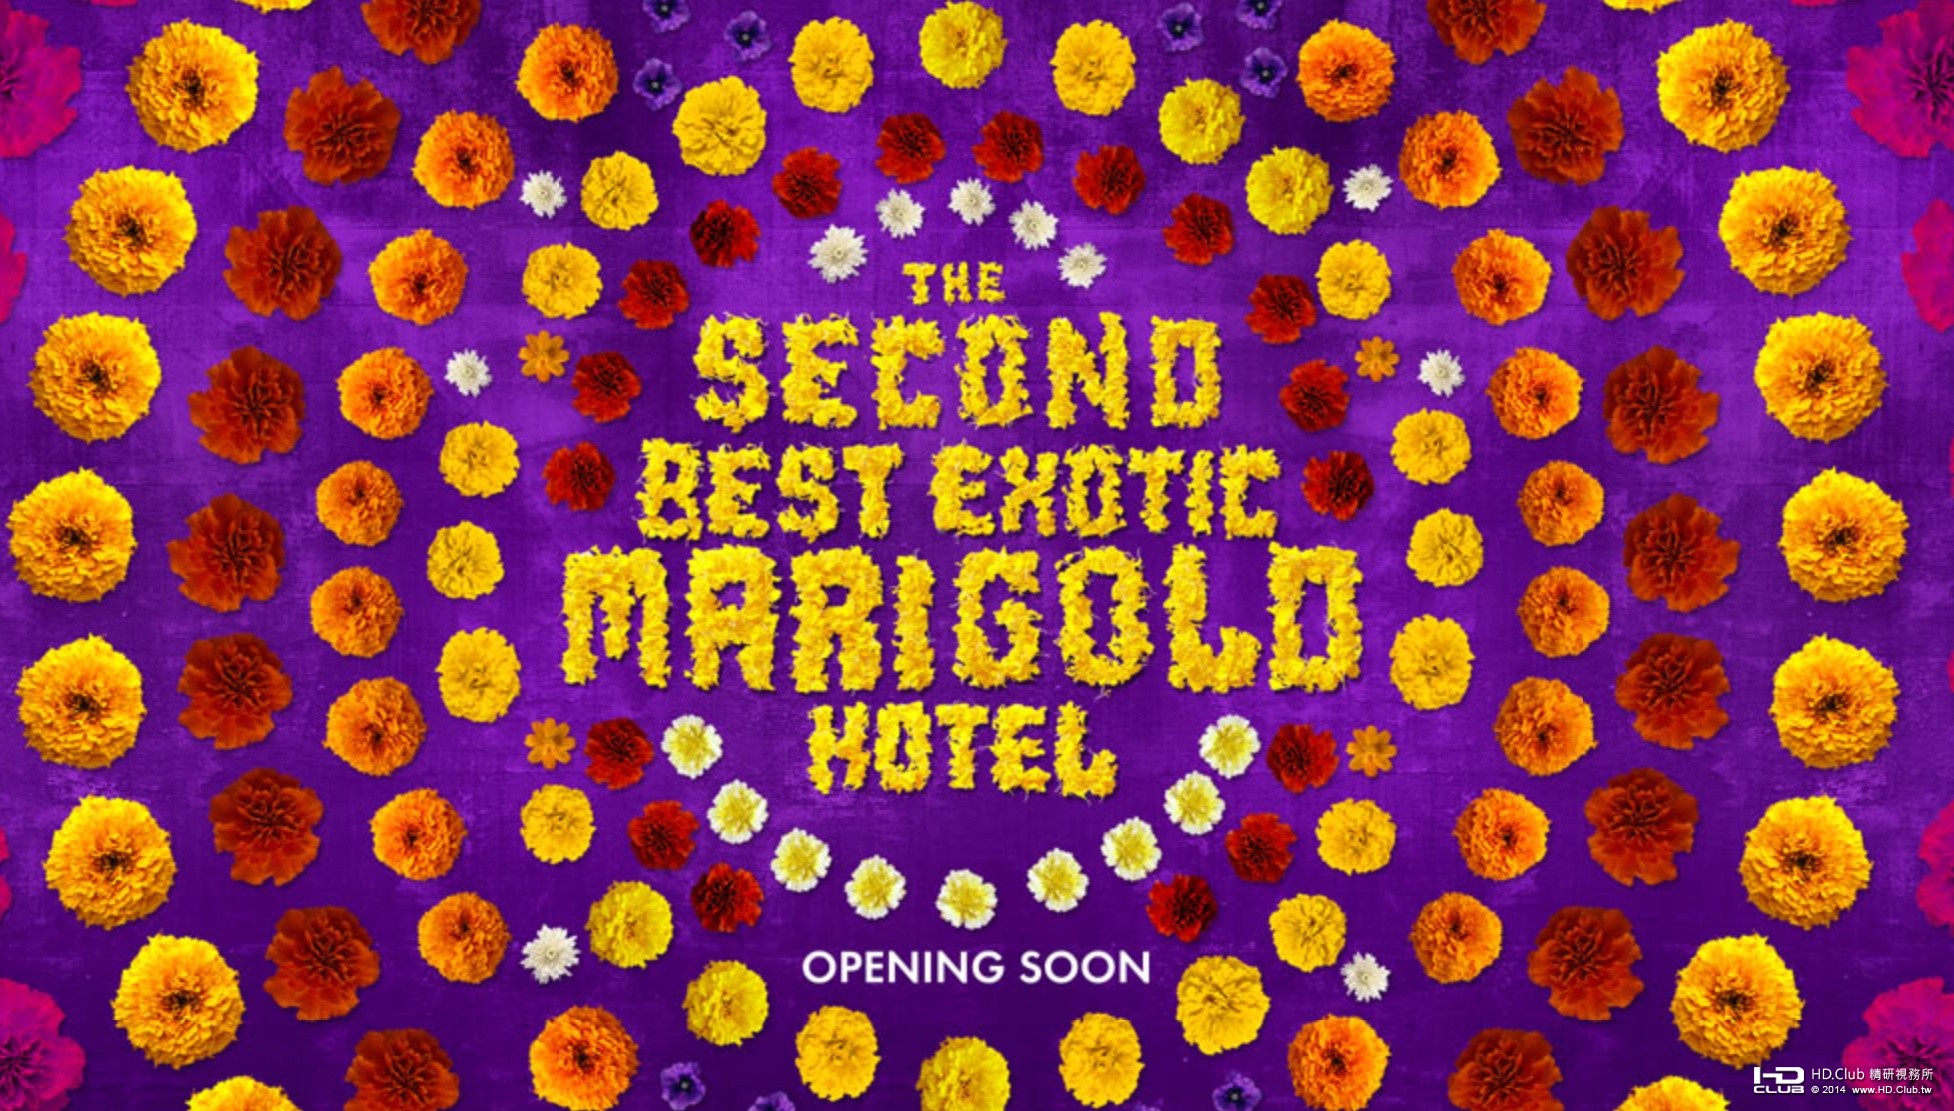 the-second-best-exotic-marigold-hotel-banner.jpg